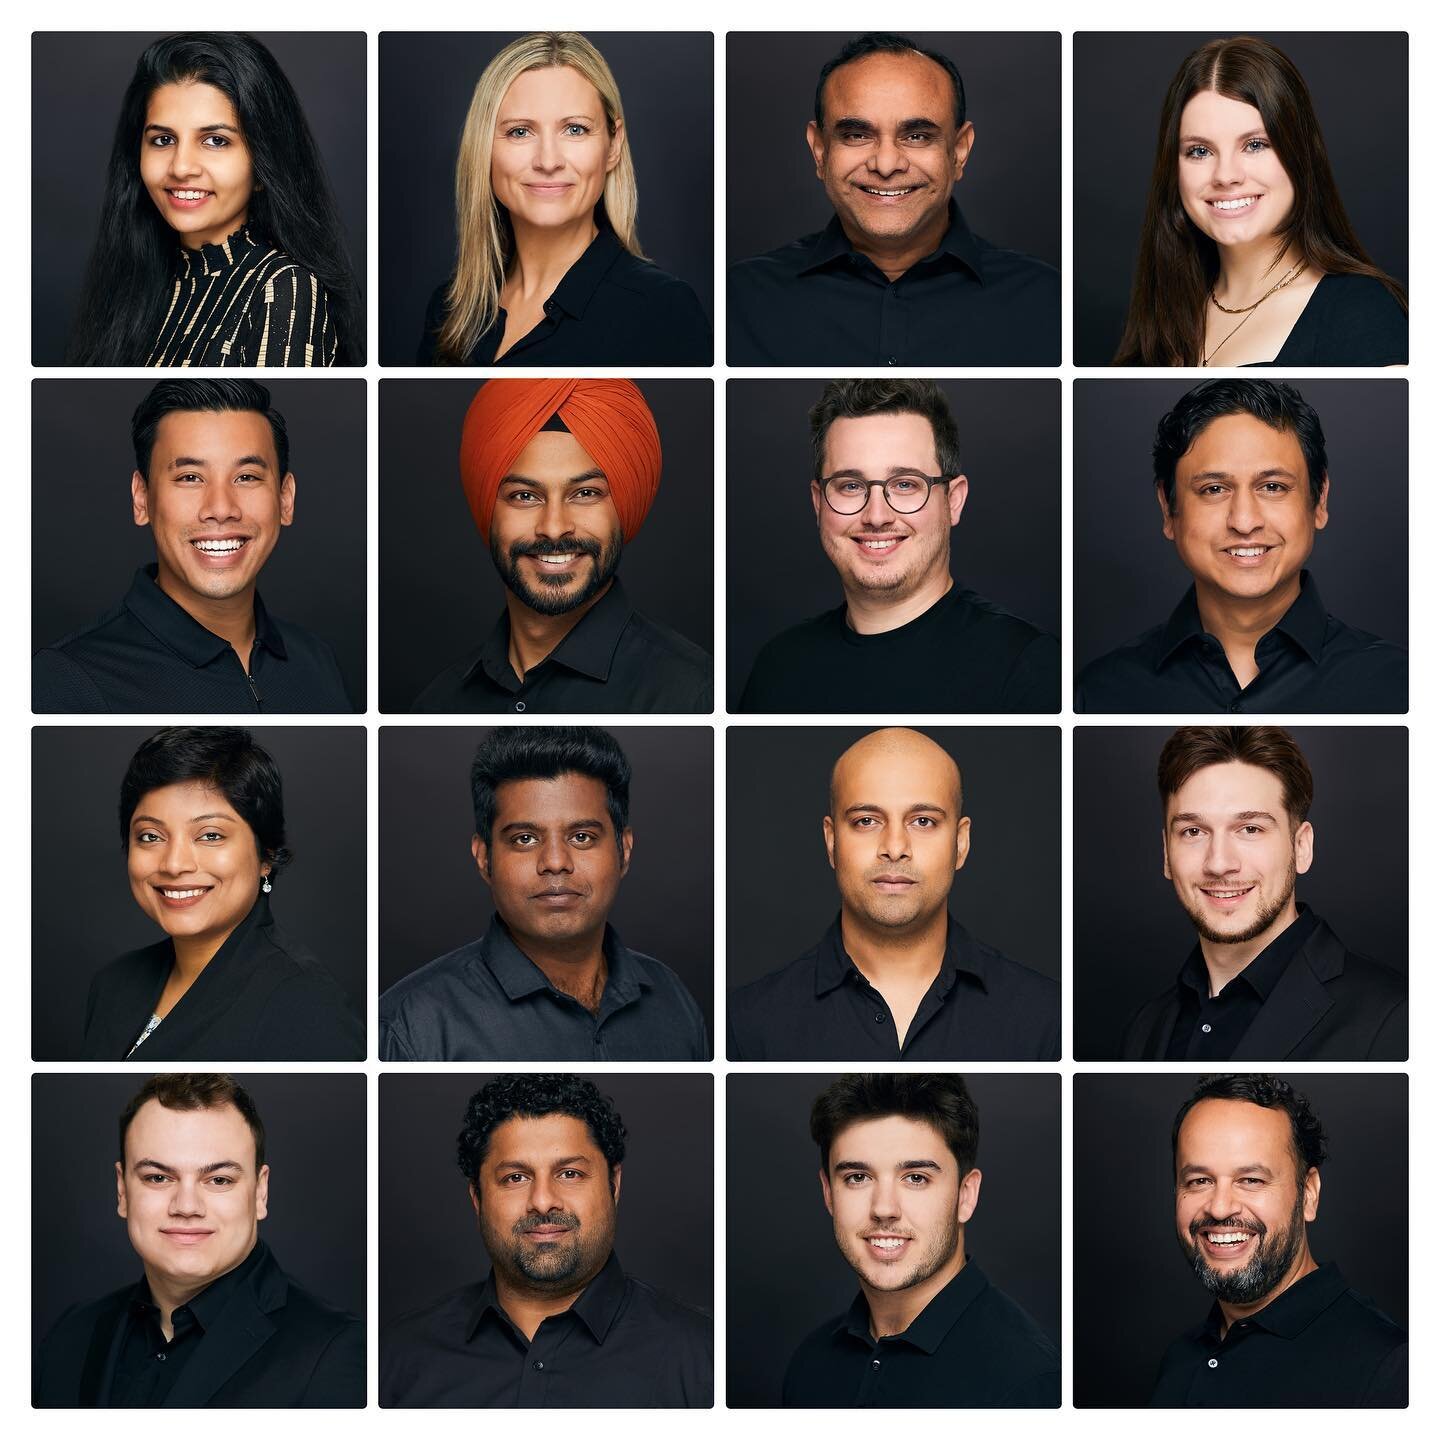 Clients love to see the faces of the people at your company! Put your headshots on your website, in your email signatures, and on LinkedIn - because that&rsquo;s where clients are checking you out! With our proven headshot method, getting modern new 